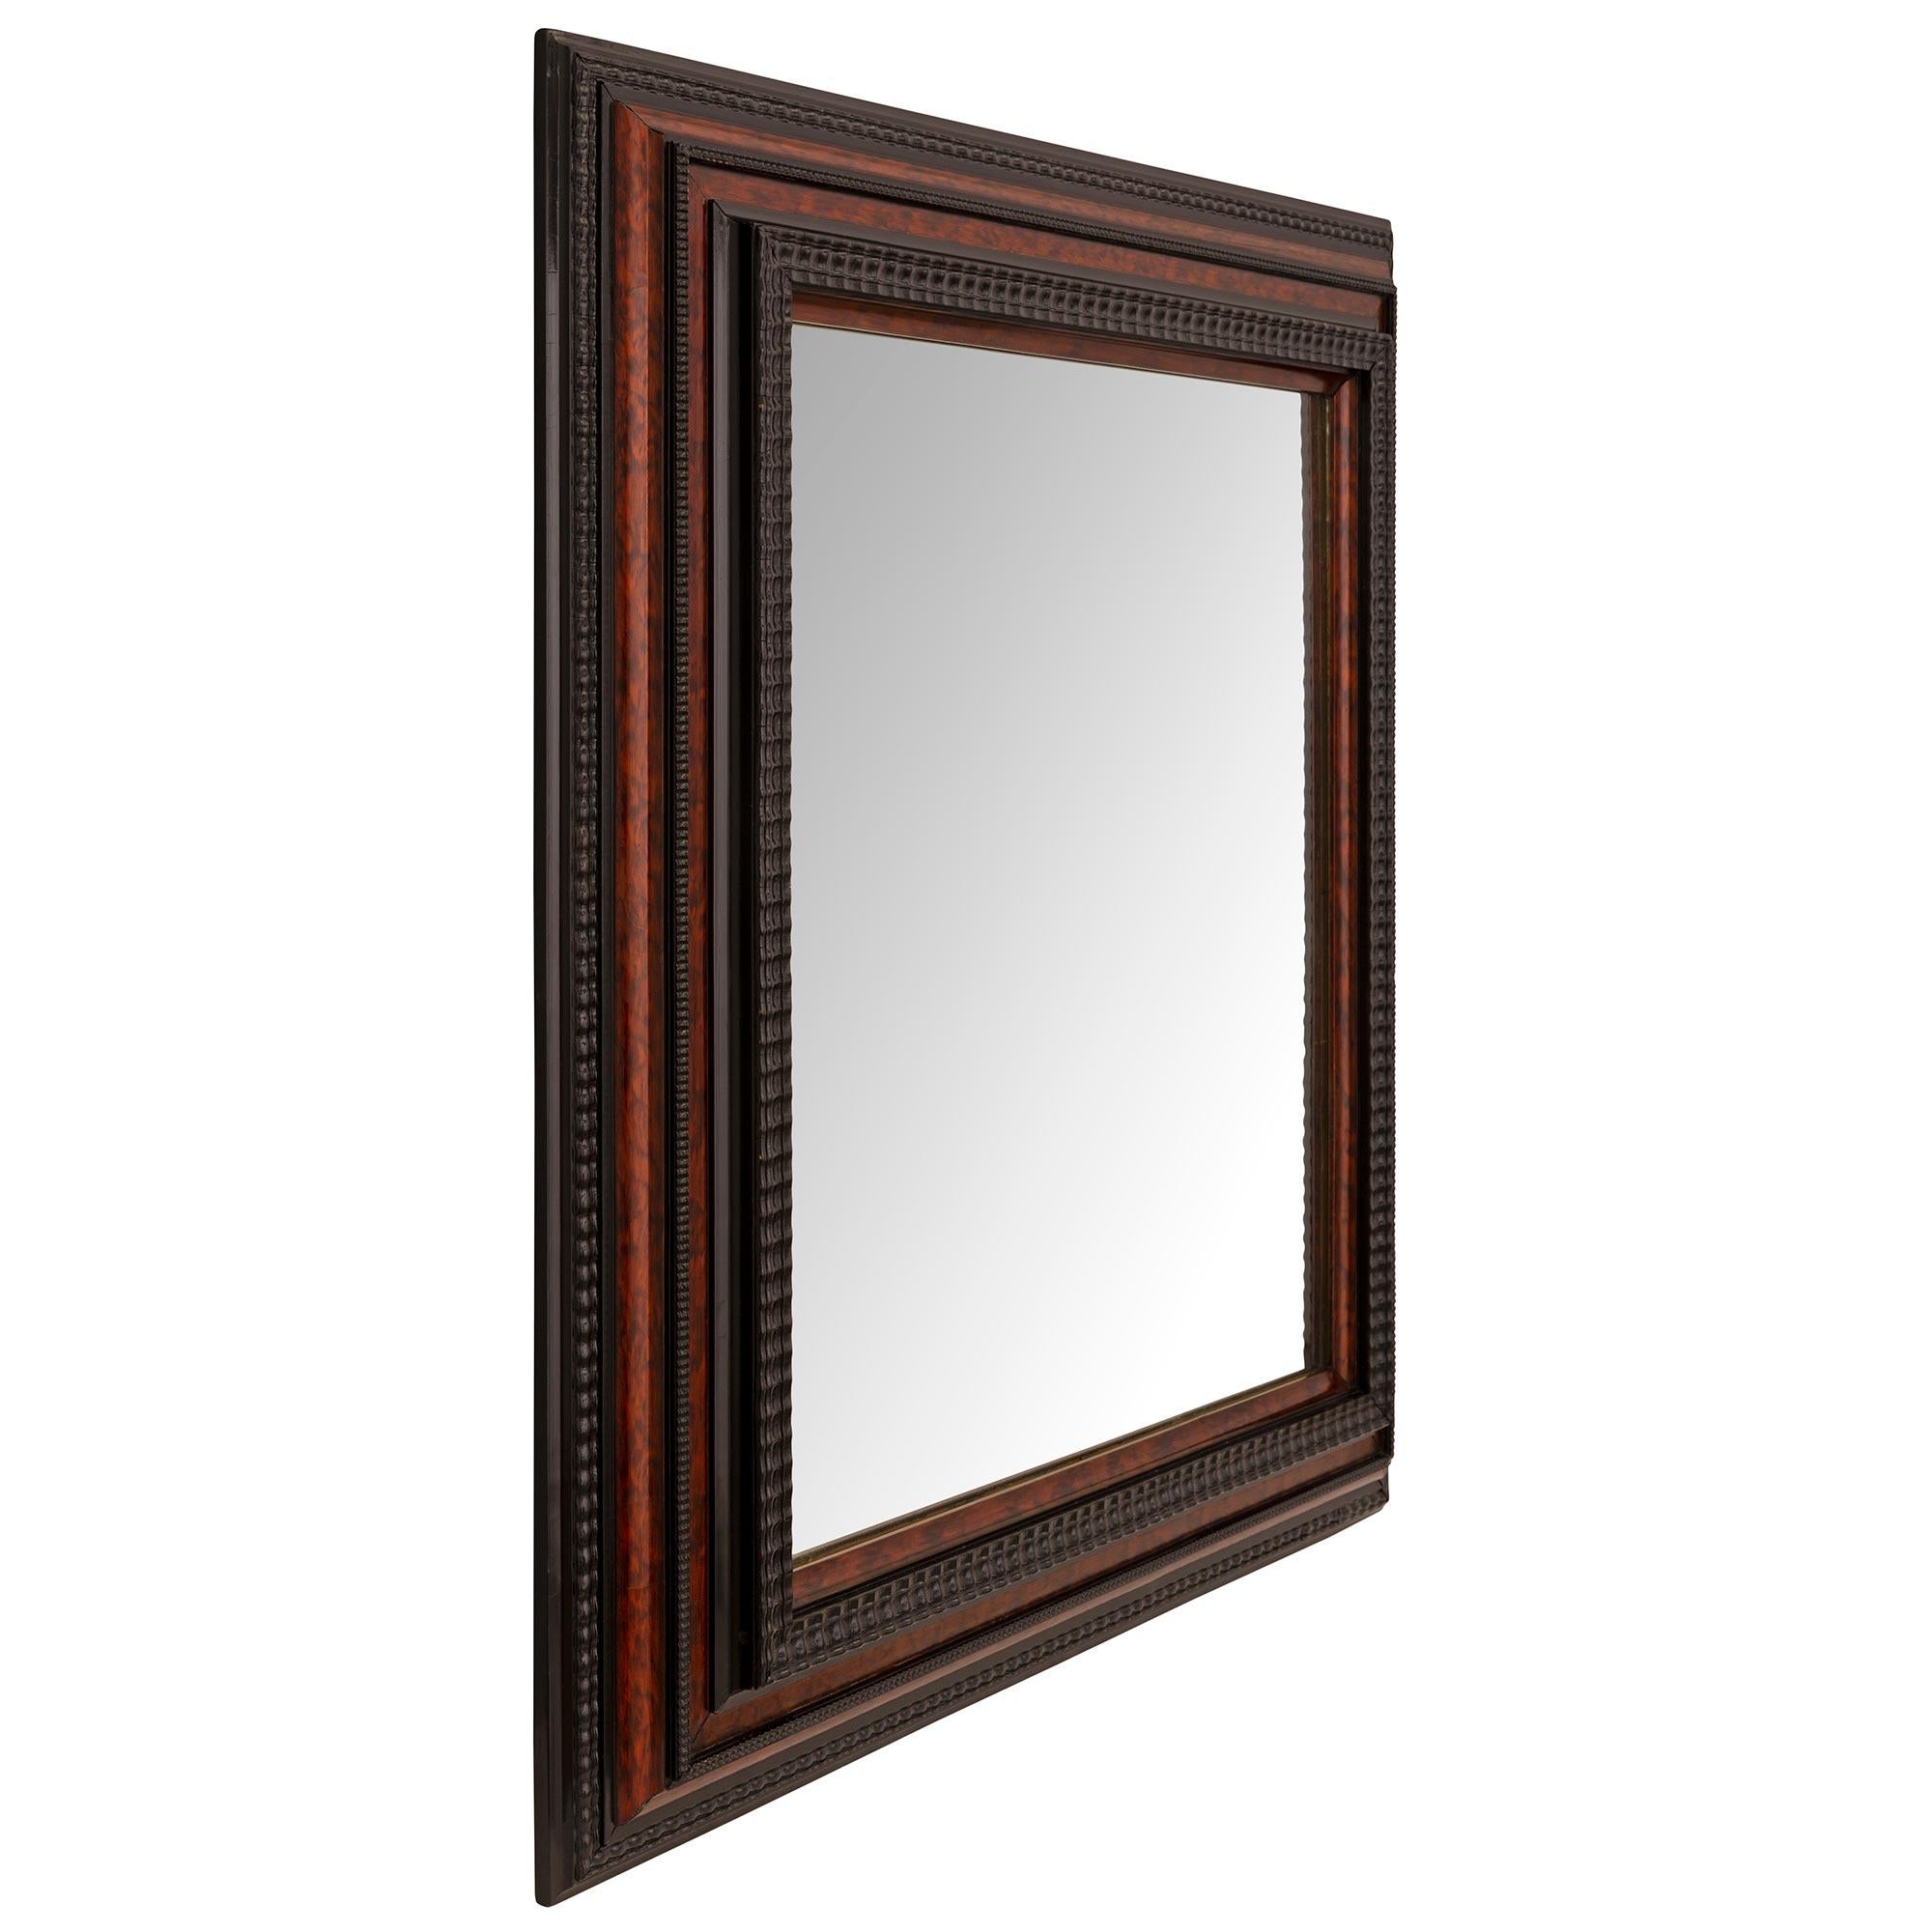 An impressive and extremely decorative Italian 19th century Florentine st. ebonized fruitwood and exotic wood mirror. The original mirror plate is framed within a wonderfully executed mottled stepped frame with wonderful wavy and beaded designs